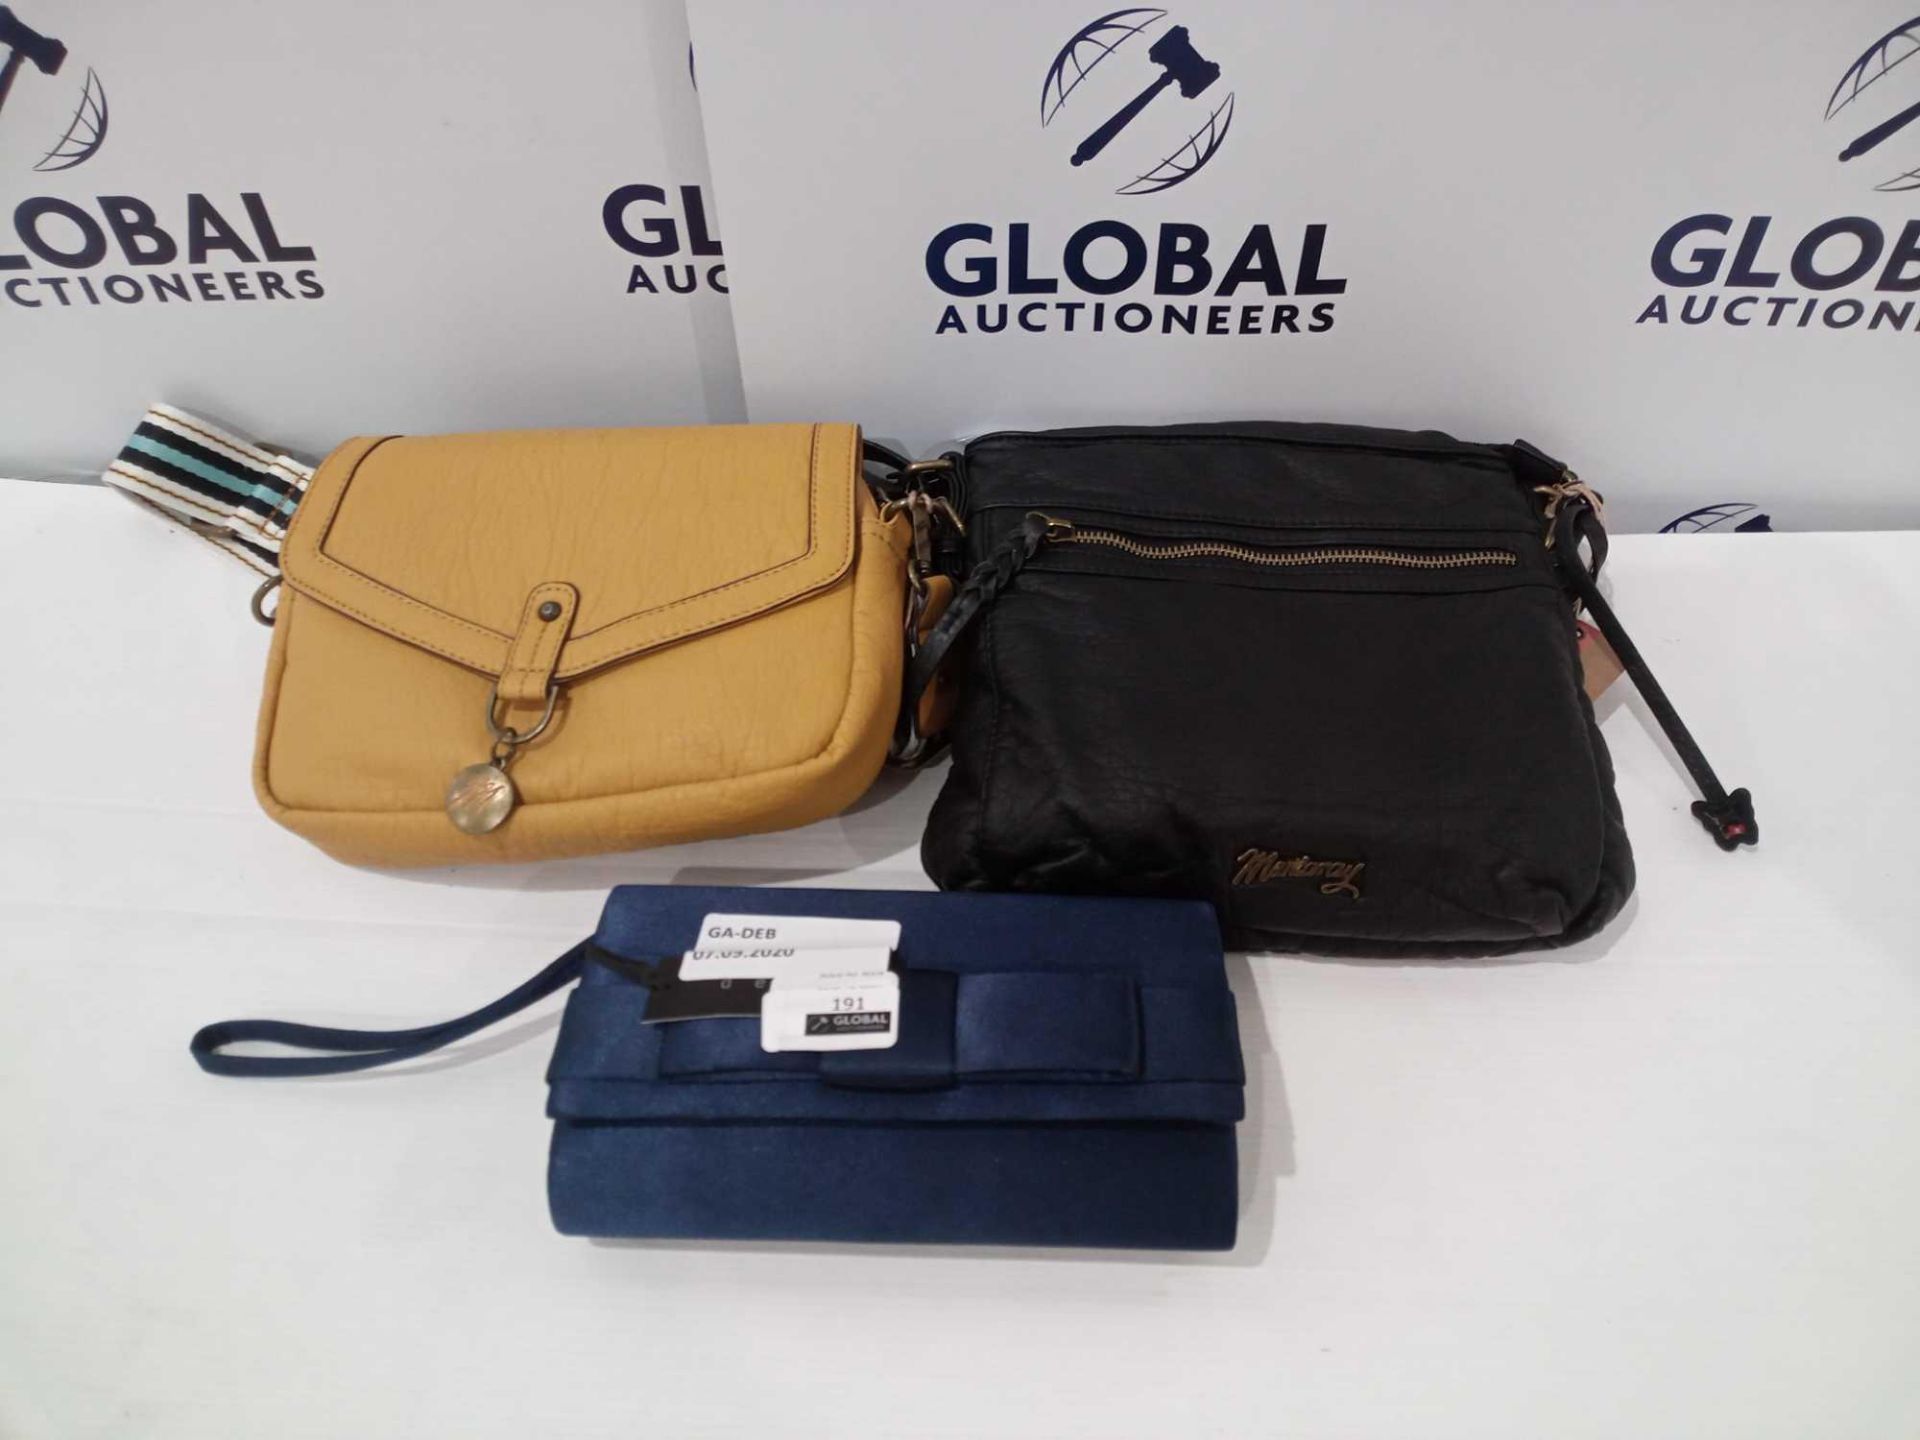 Rrp £75 Lot To Include 3 Women'S Handbags Purses Including Blue Clutch Bag Mustard Coloured Yellow H